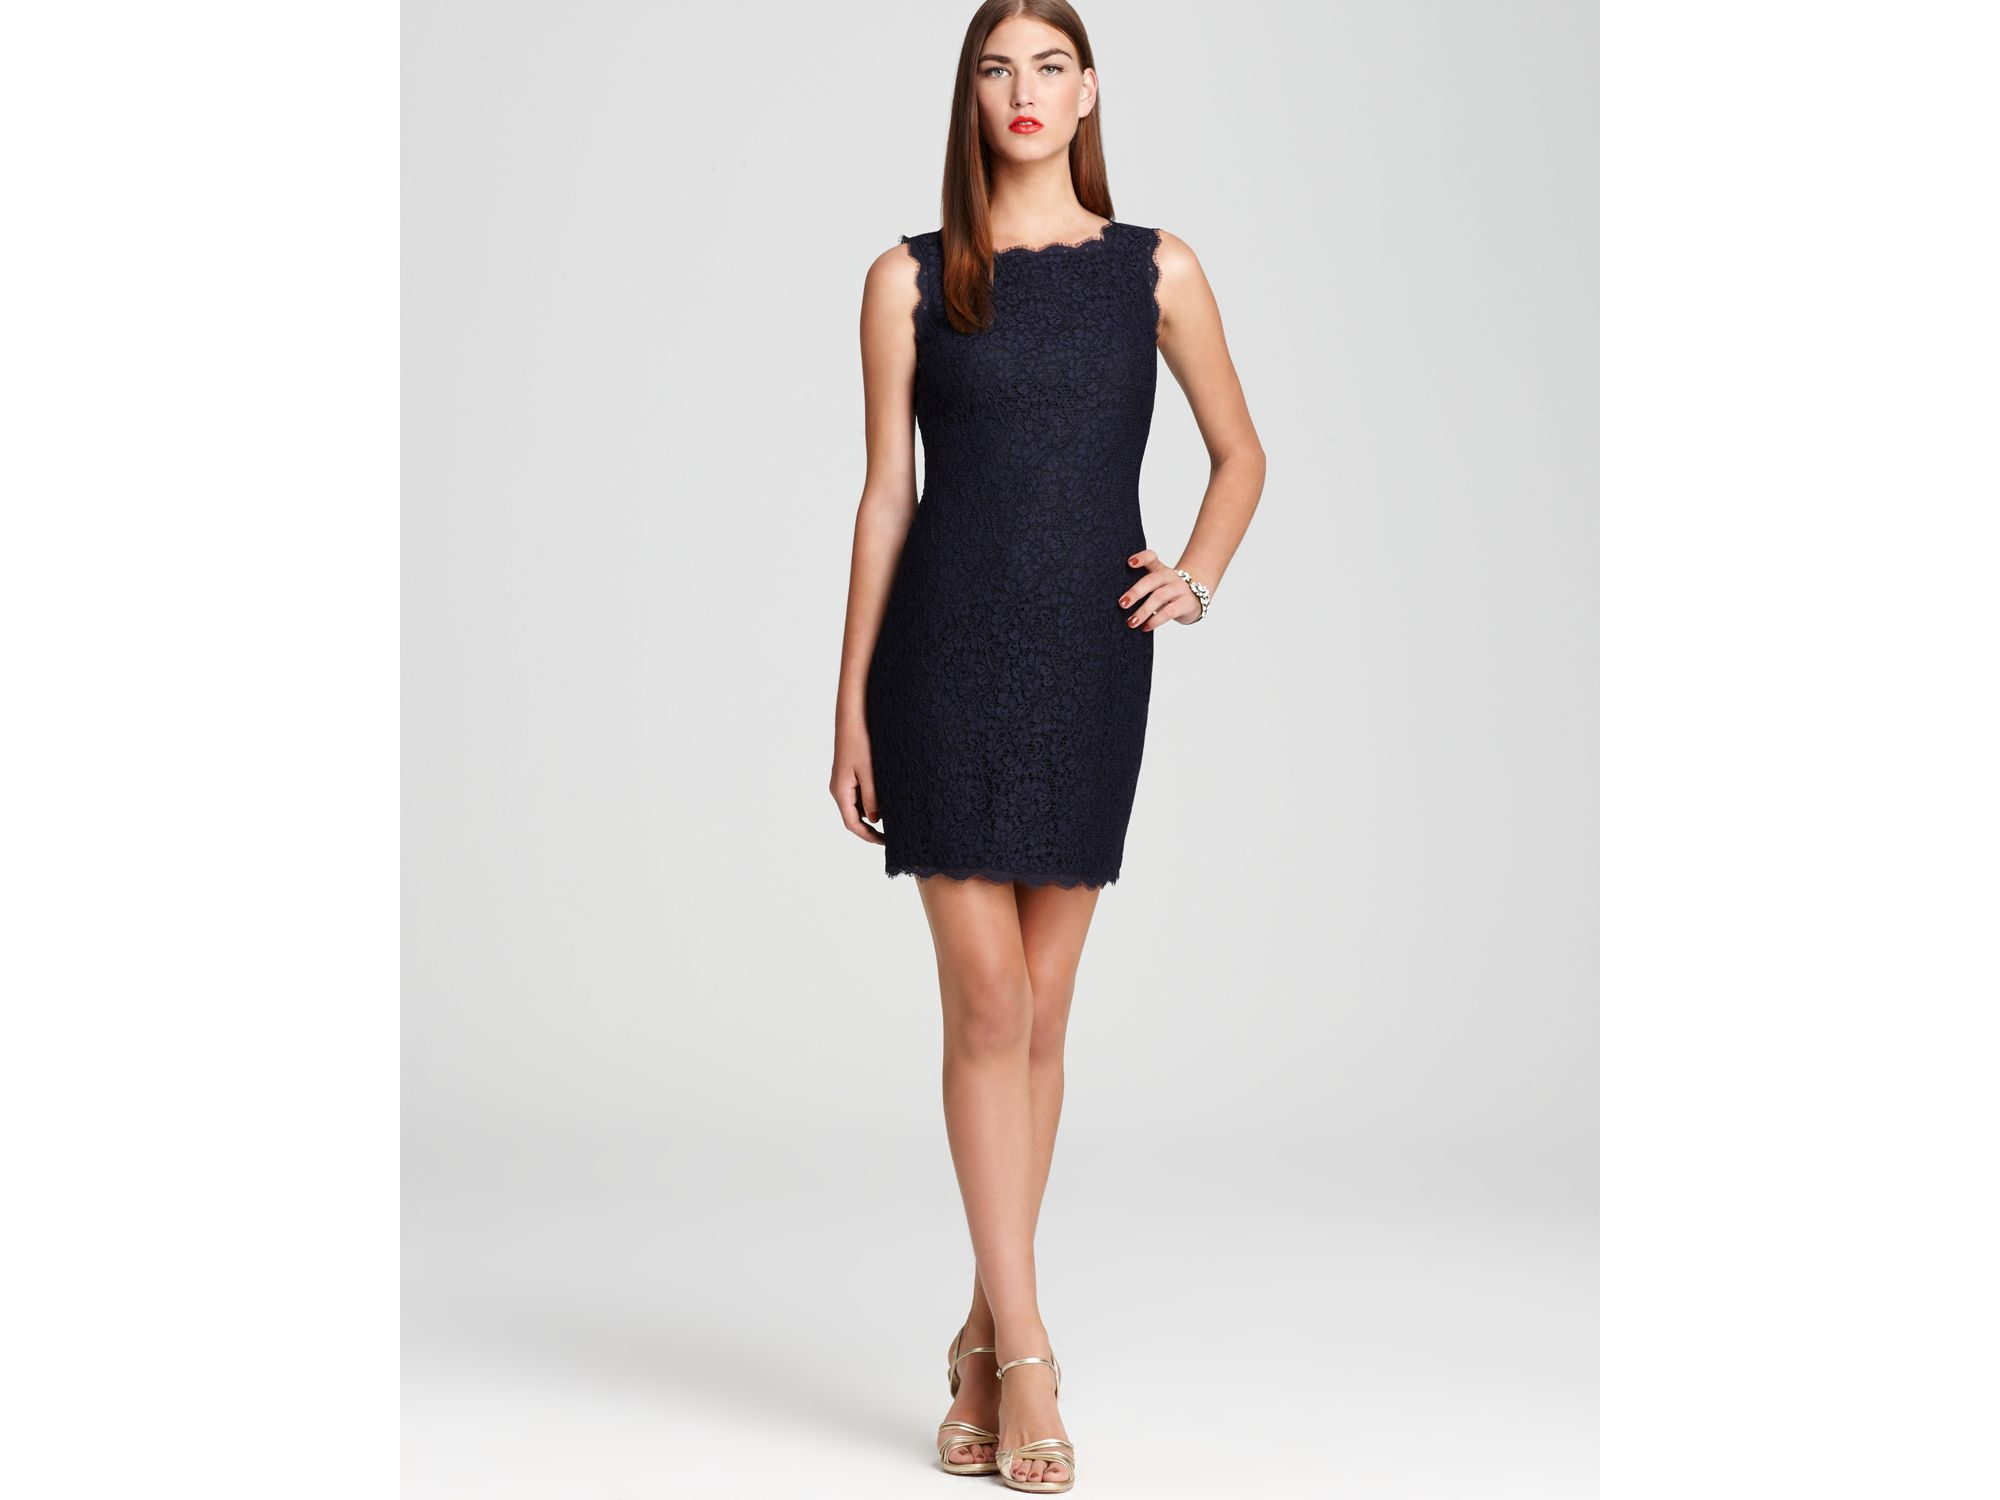 Adrianna Papell Lace Dress - Sleeveless Square Neck Short in Blue - Lyst